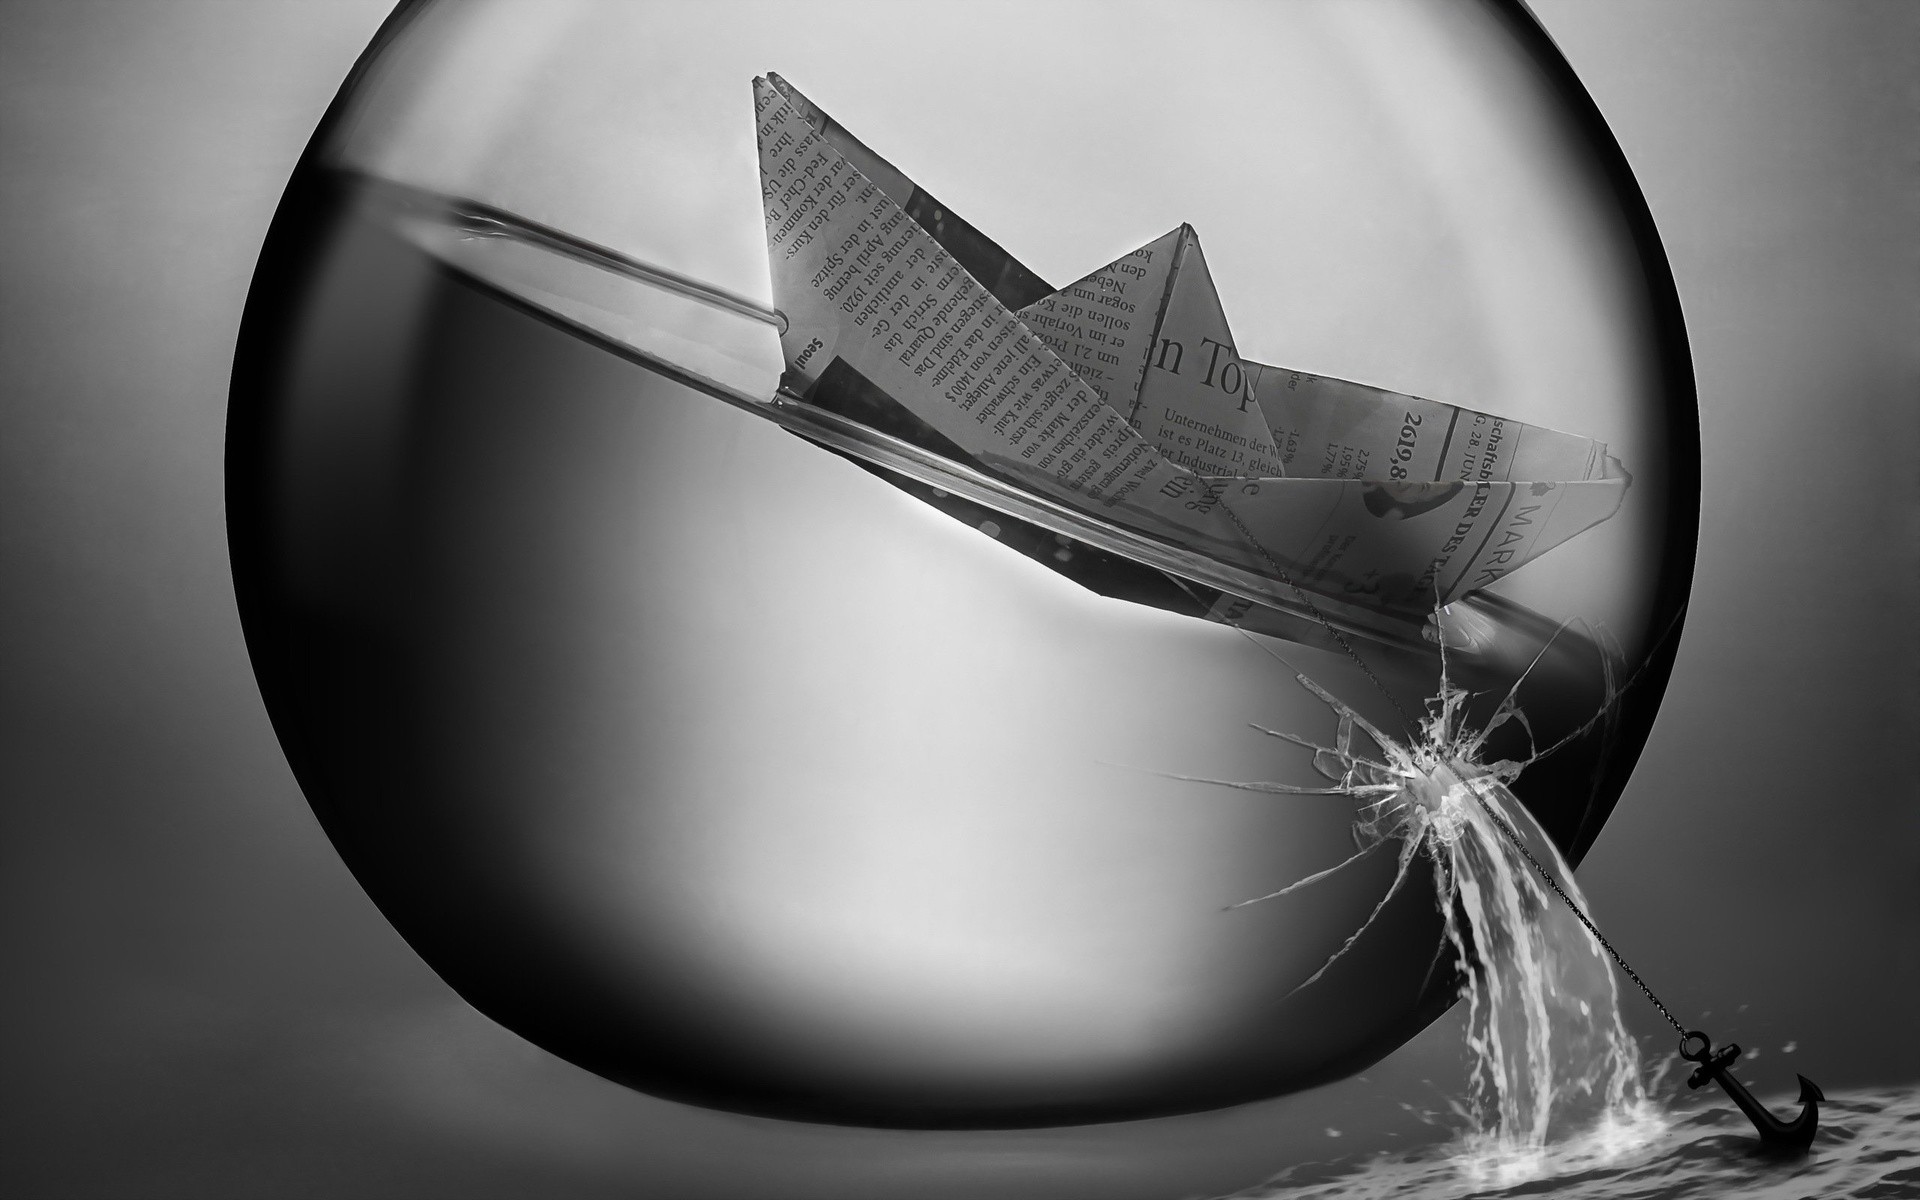 monochrome, Artwork, Paper boats, Water, Sphere, Broken glass, Anchors, Boat, Paper, Newspapers, Chains Wallpaper